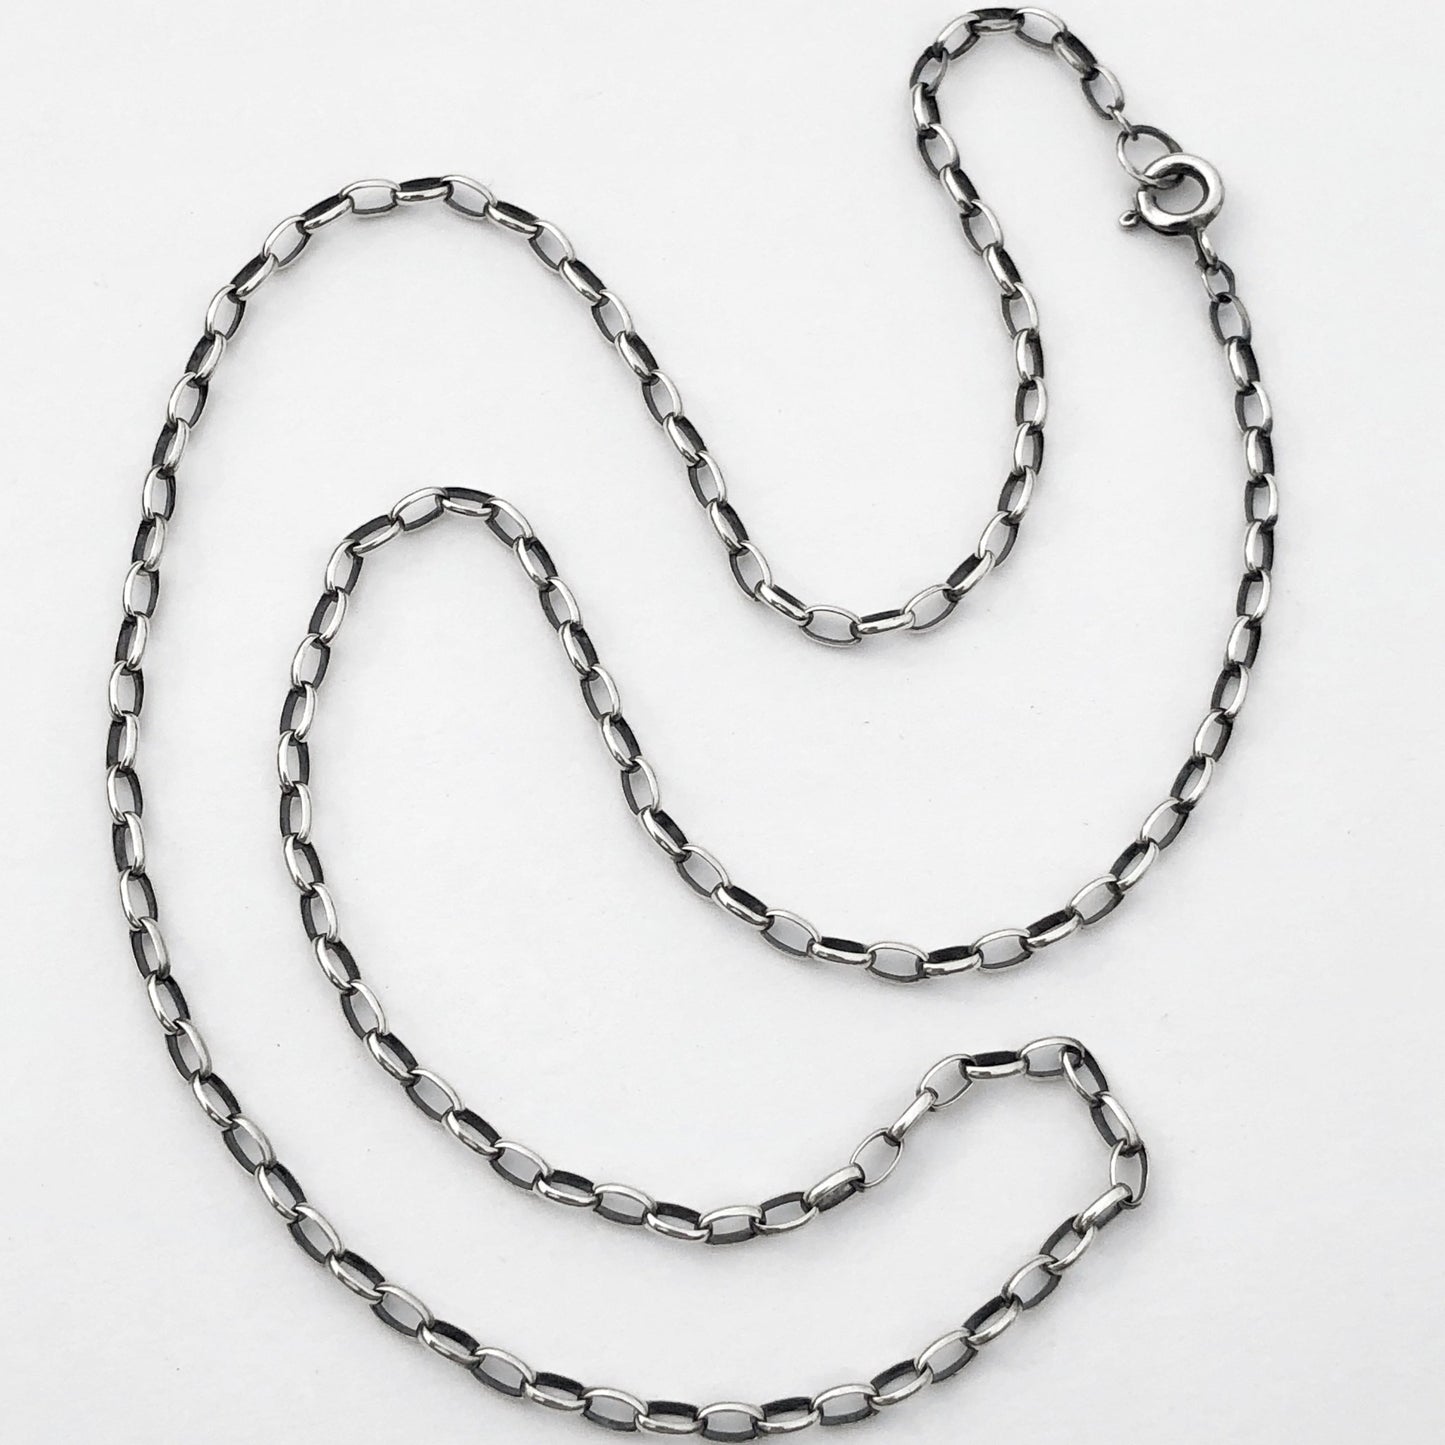 Oval Rolo Chain